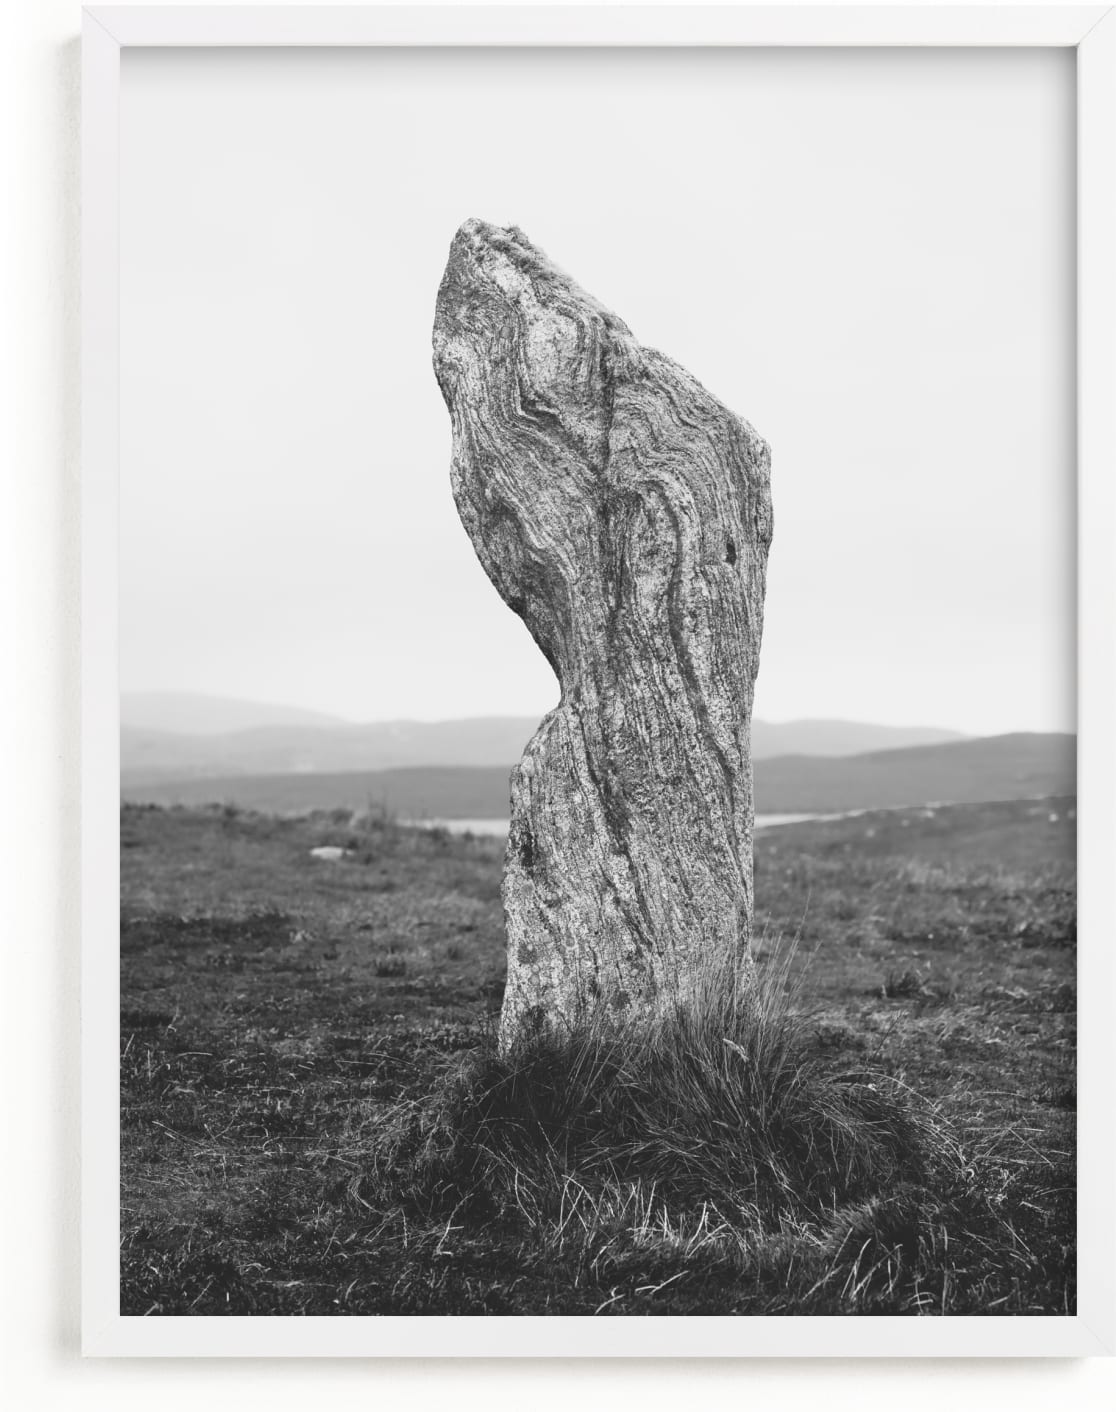 This is a black and white art by Kamala Nahas called Standing Stones II.